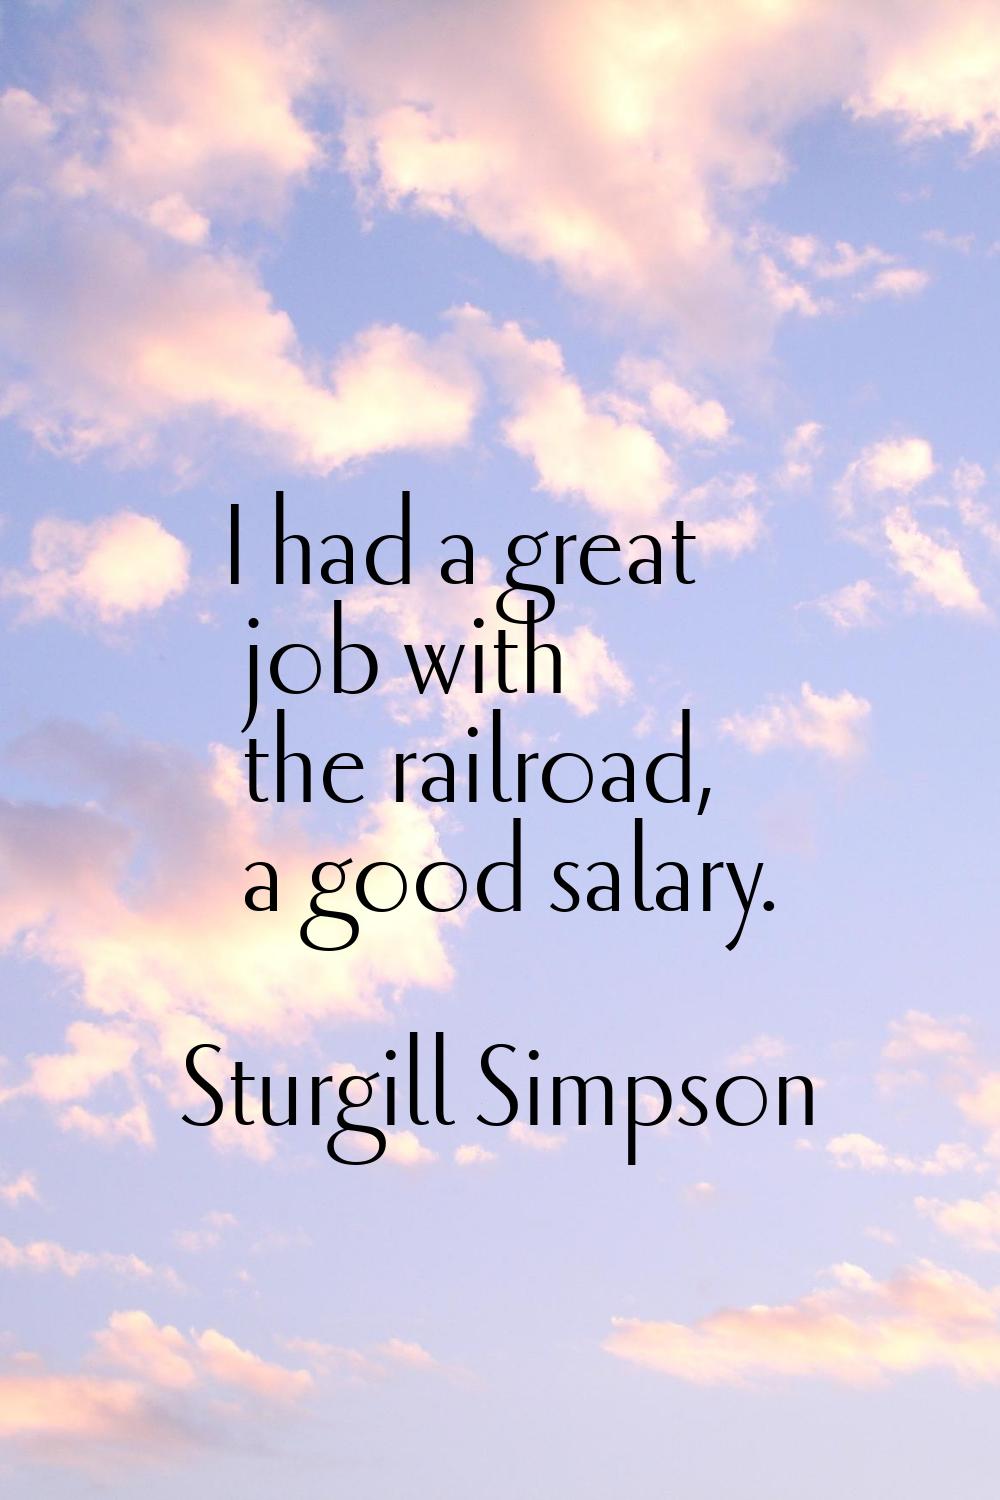 I had a great job with the railroad, a good salary.